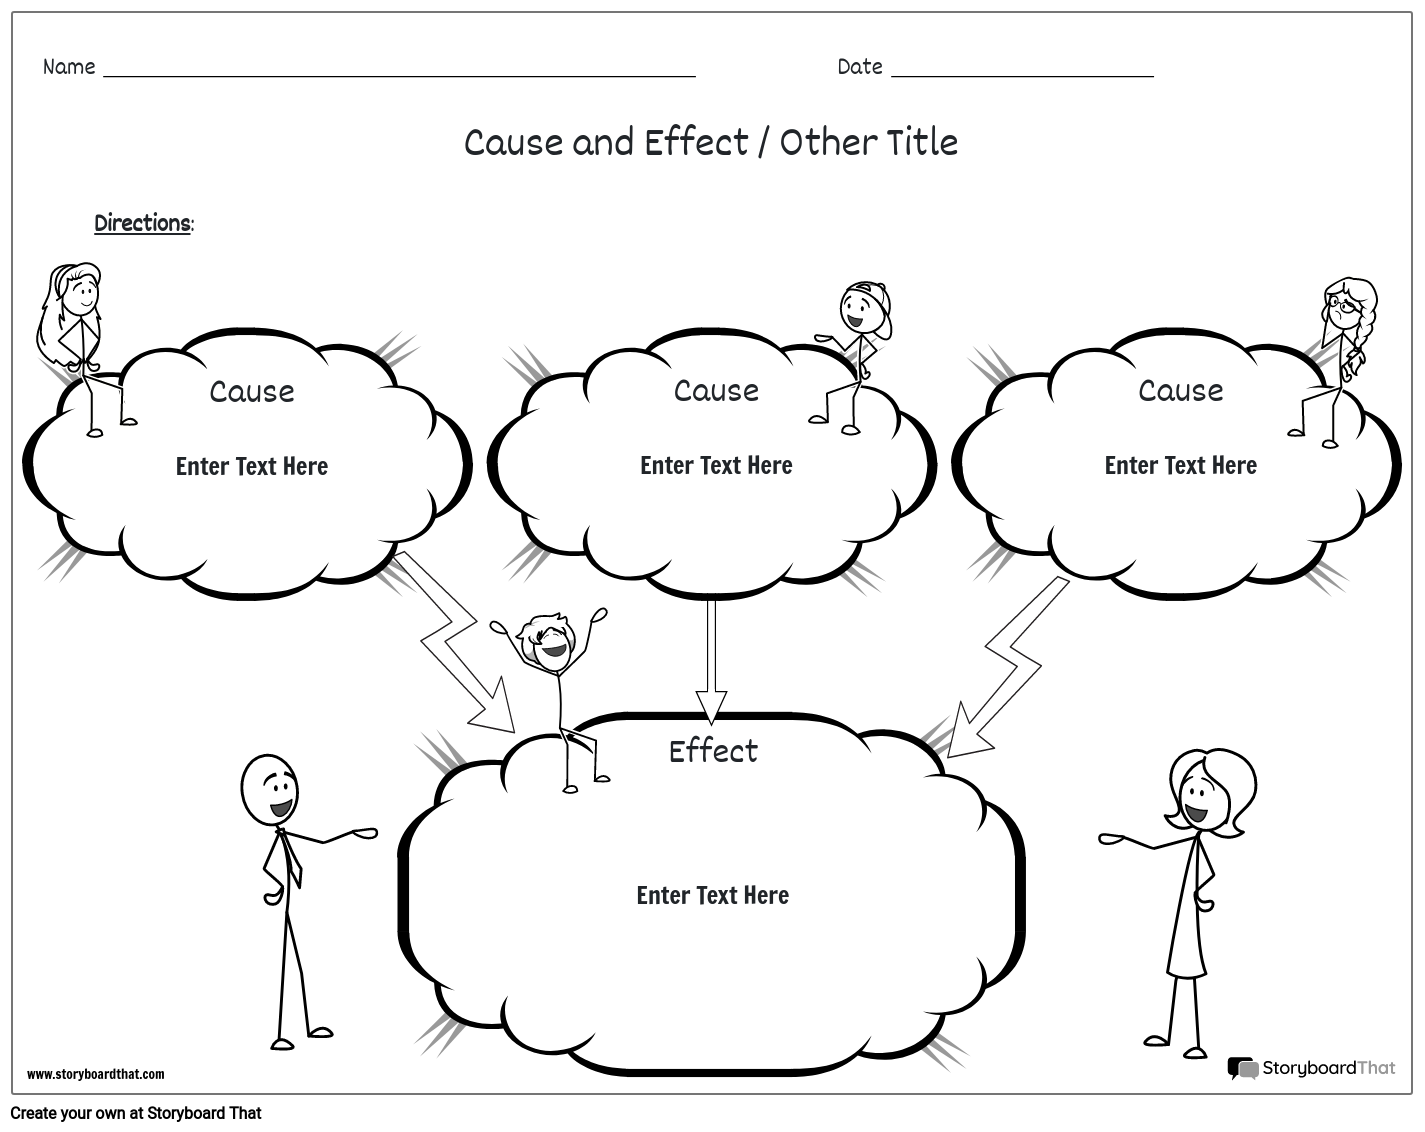 Cause and Effect Worksheet Template Featuring Stick Figures